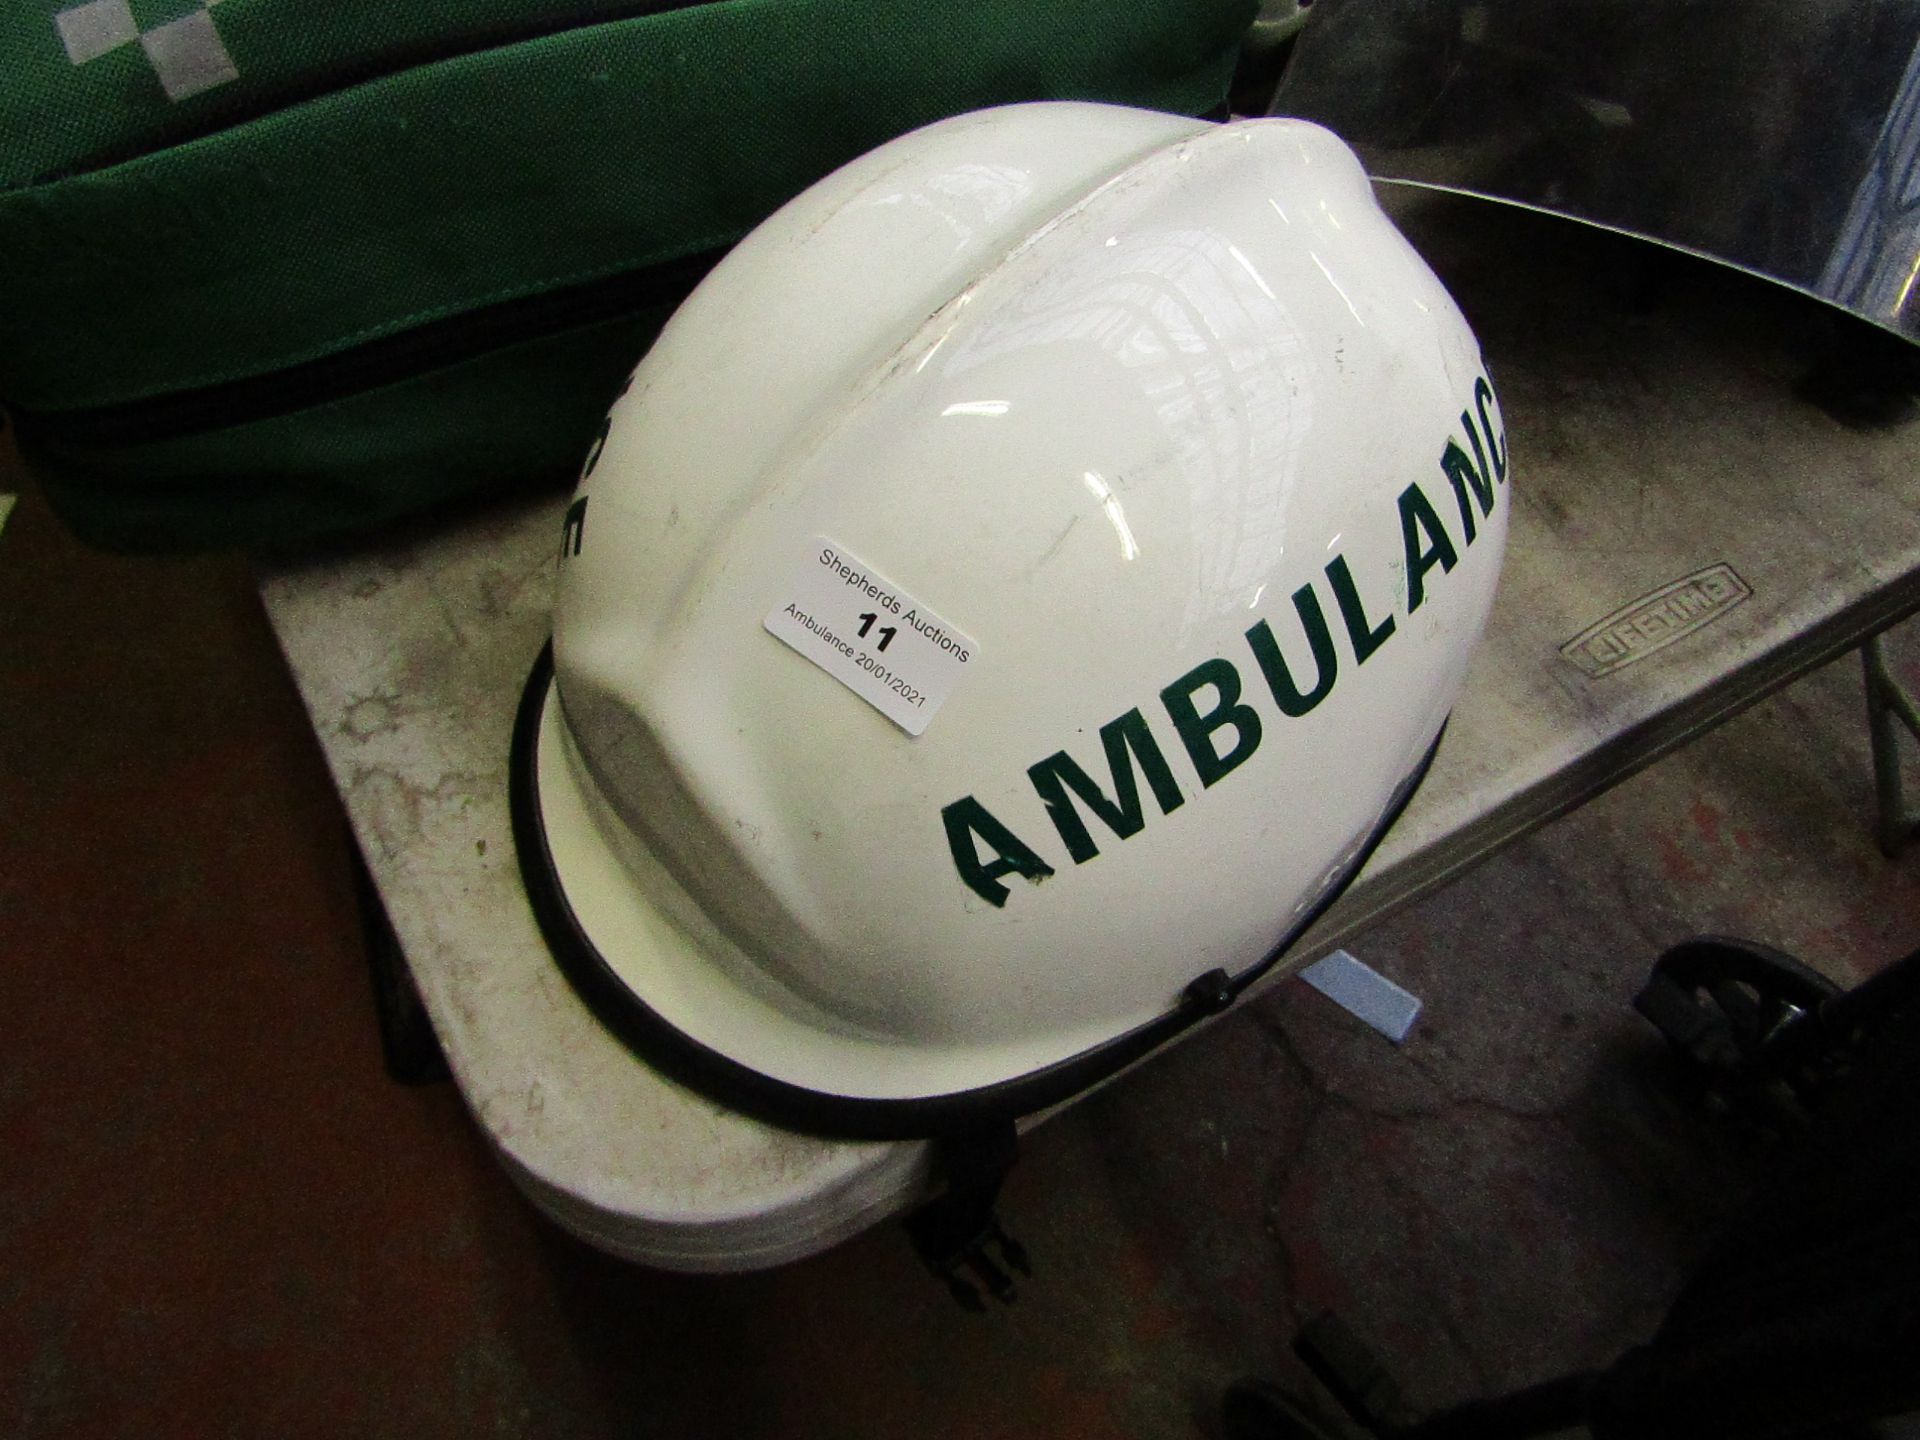 PACIFIC AMBULANCE PROTECTIVE HELMET MEDICAL EMERGENCY PARAMEDIC DOCTOR, Missing plastic guard,